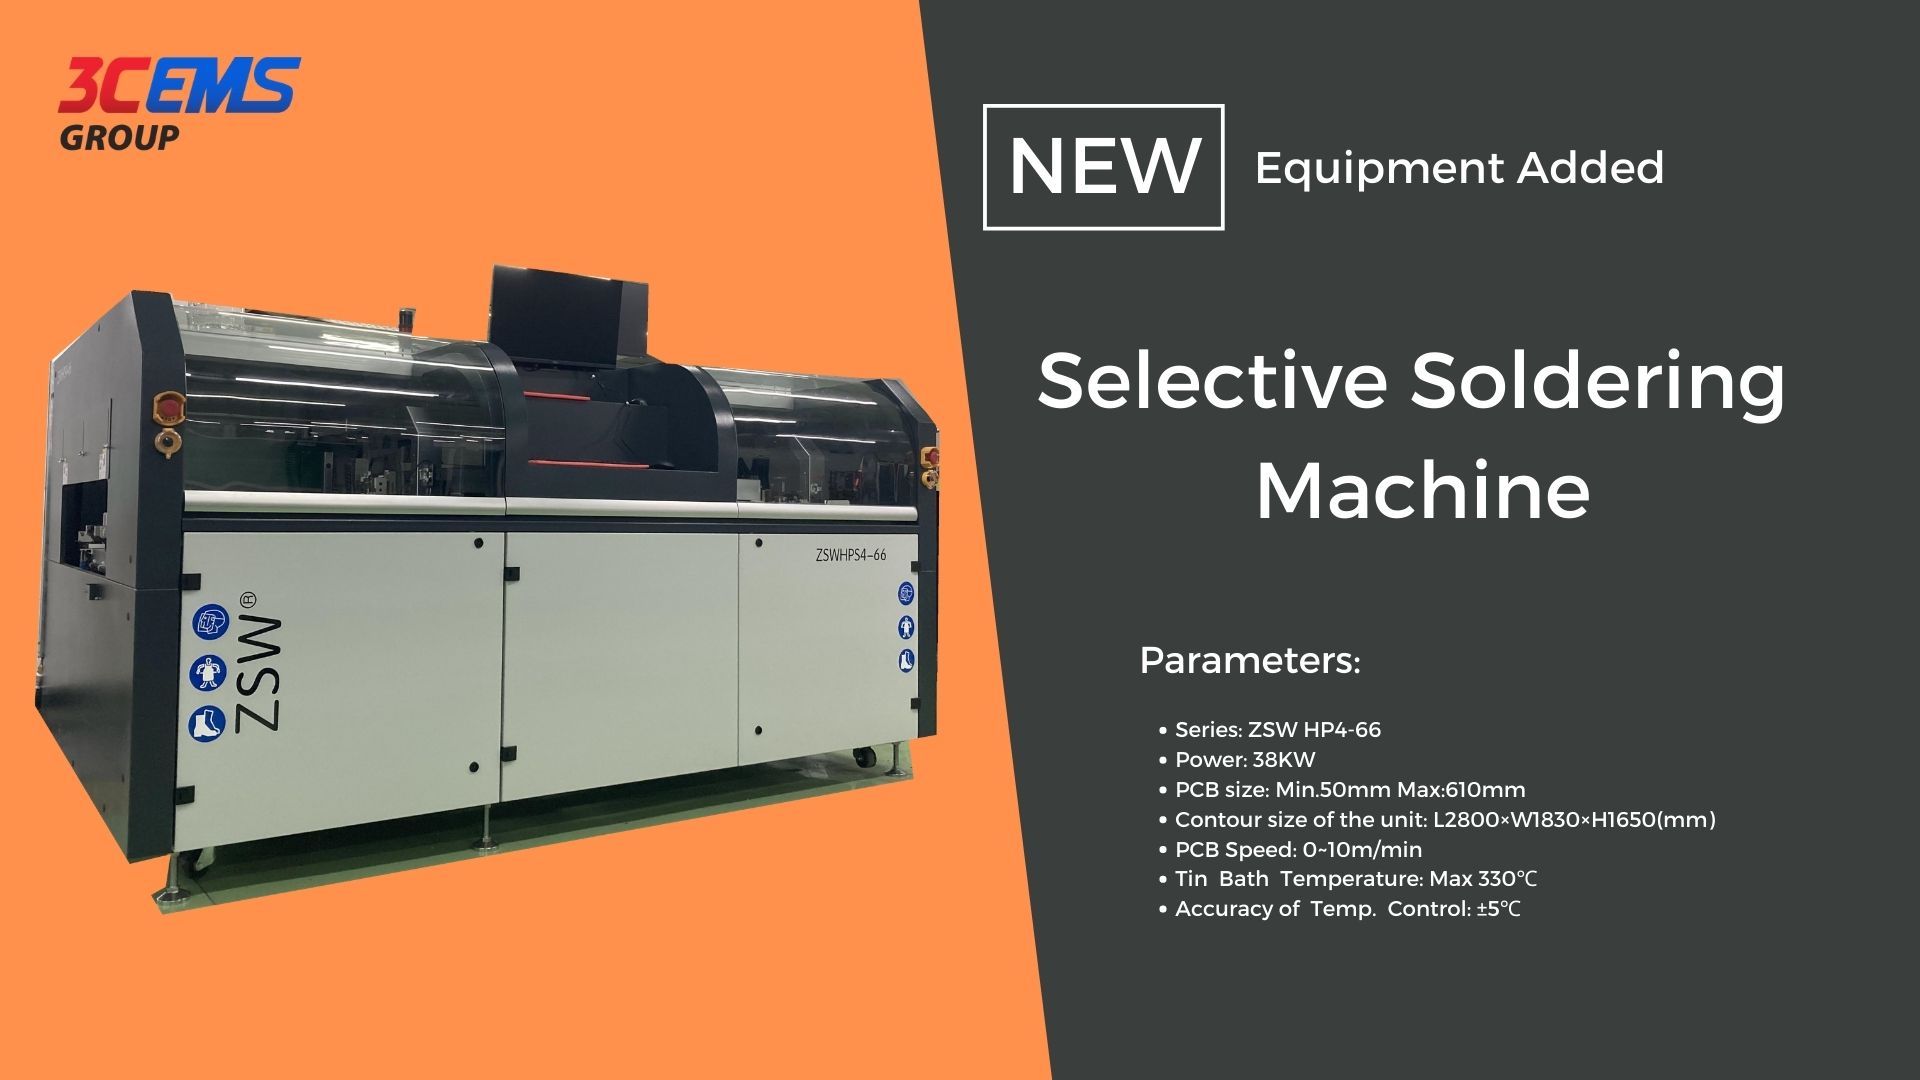 Prime Technology Newly Added Equipment for Selective Soldering Machine